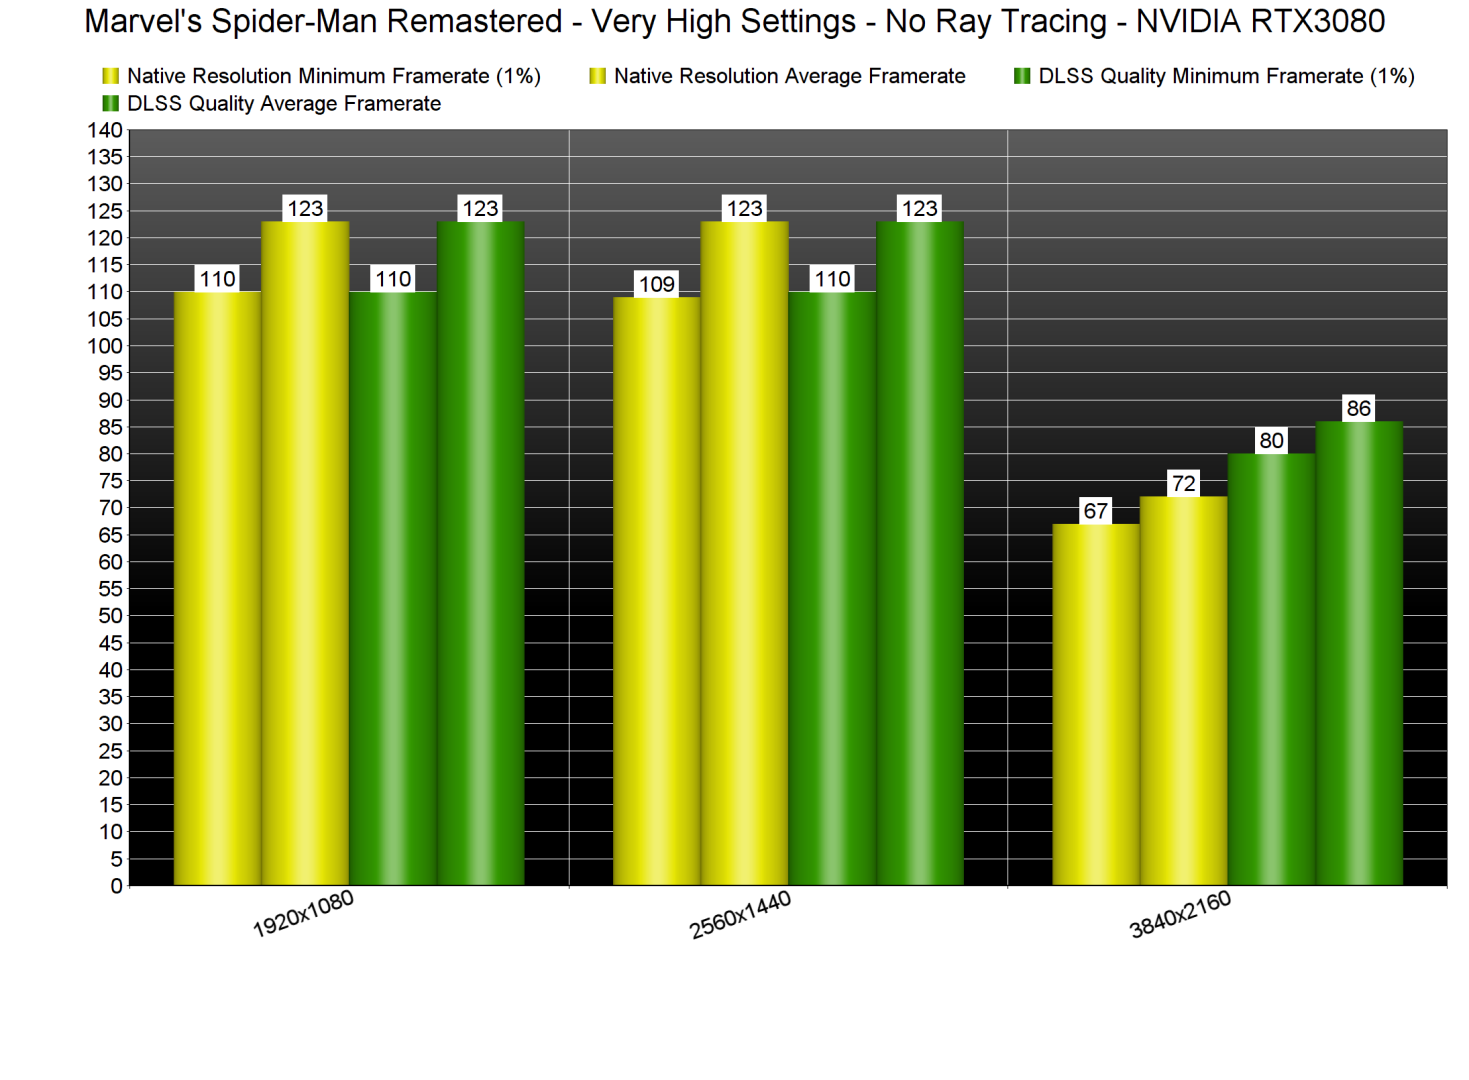 Marvel's Spider-Man Remastered No Ray Tracing benchmarks